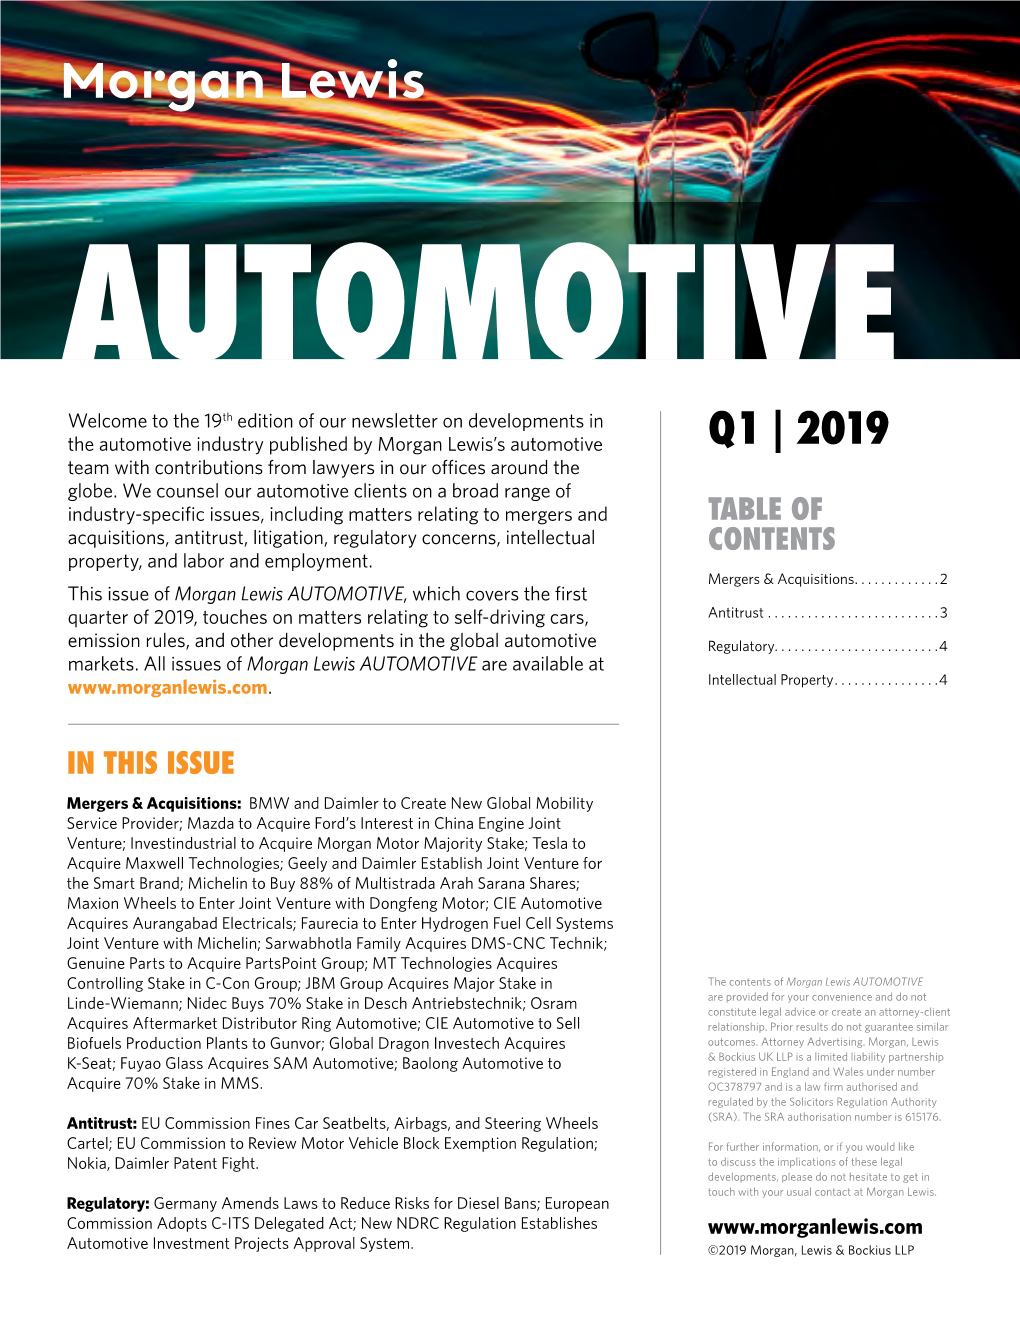 Read the Latest Issue of Morgan Lewis Automotive